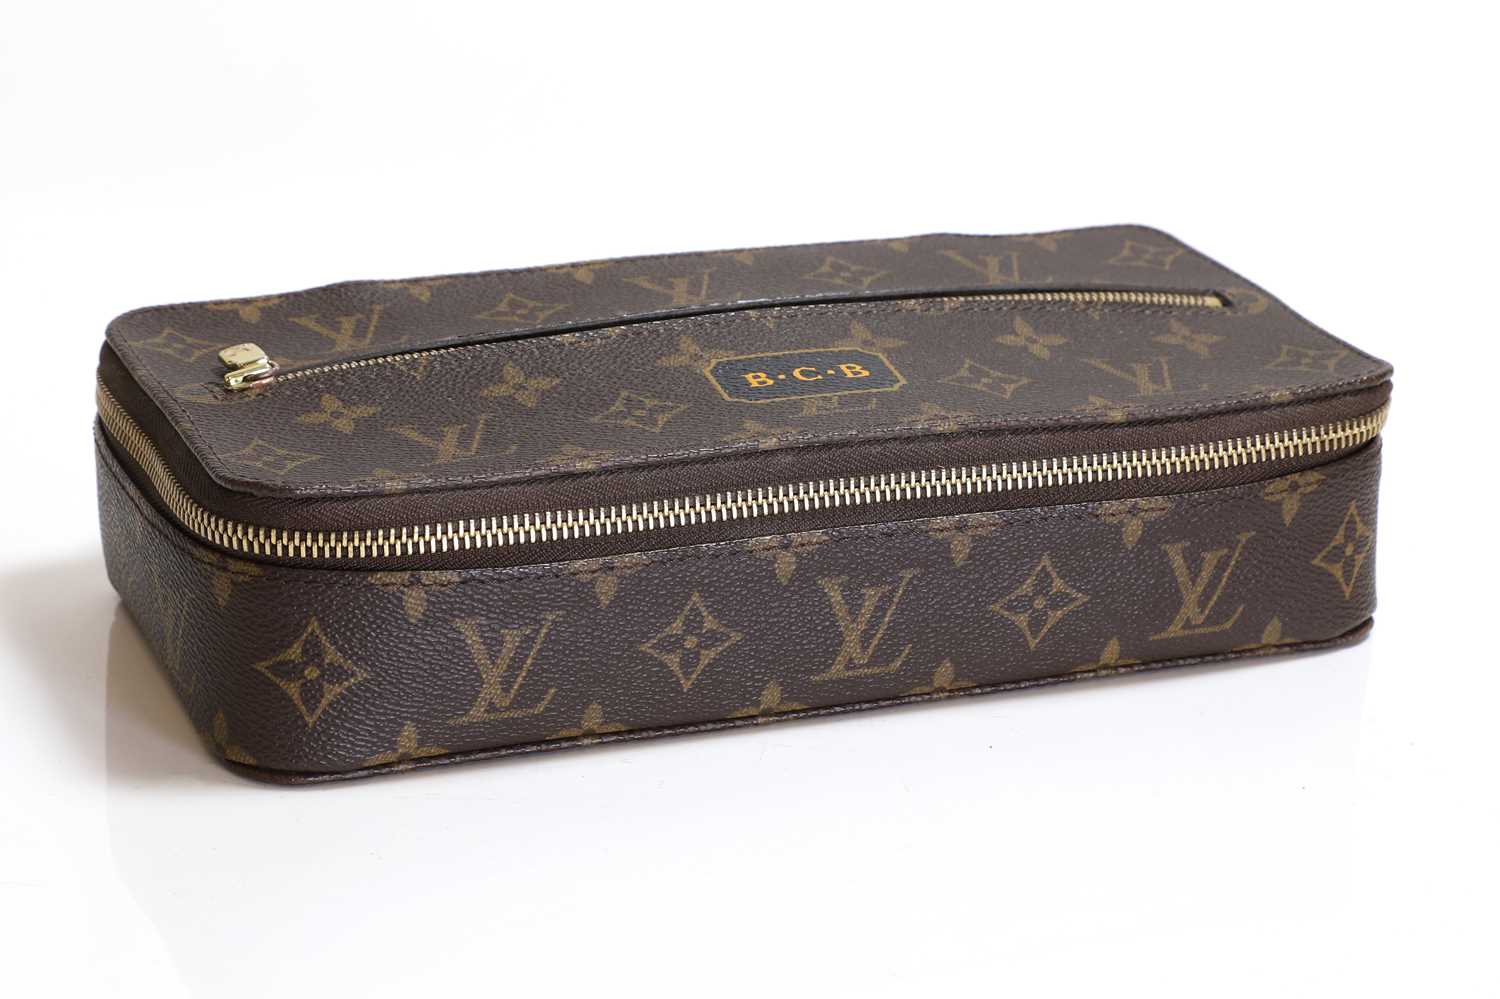 A Louis Vuitton monogrammed canvas tissue box, - Image 2 of 4